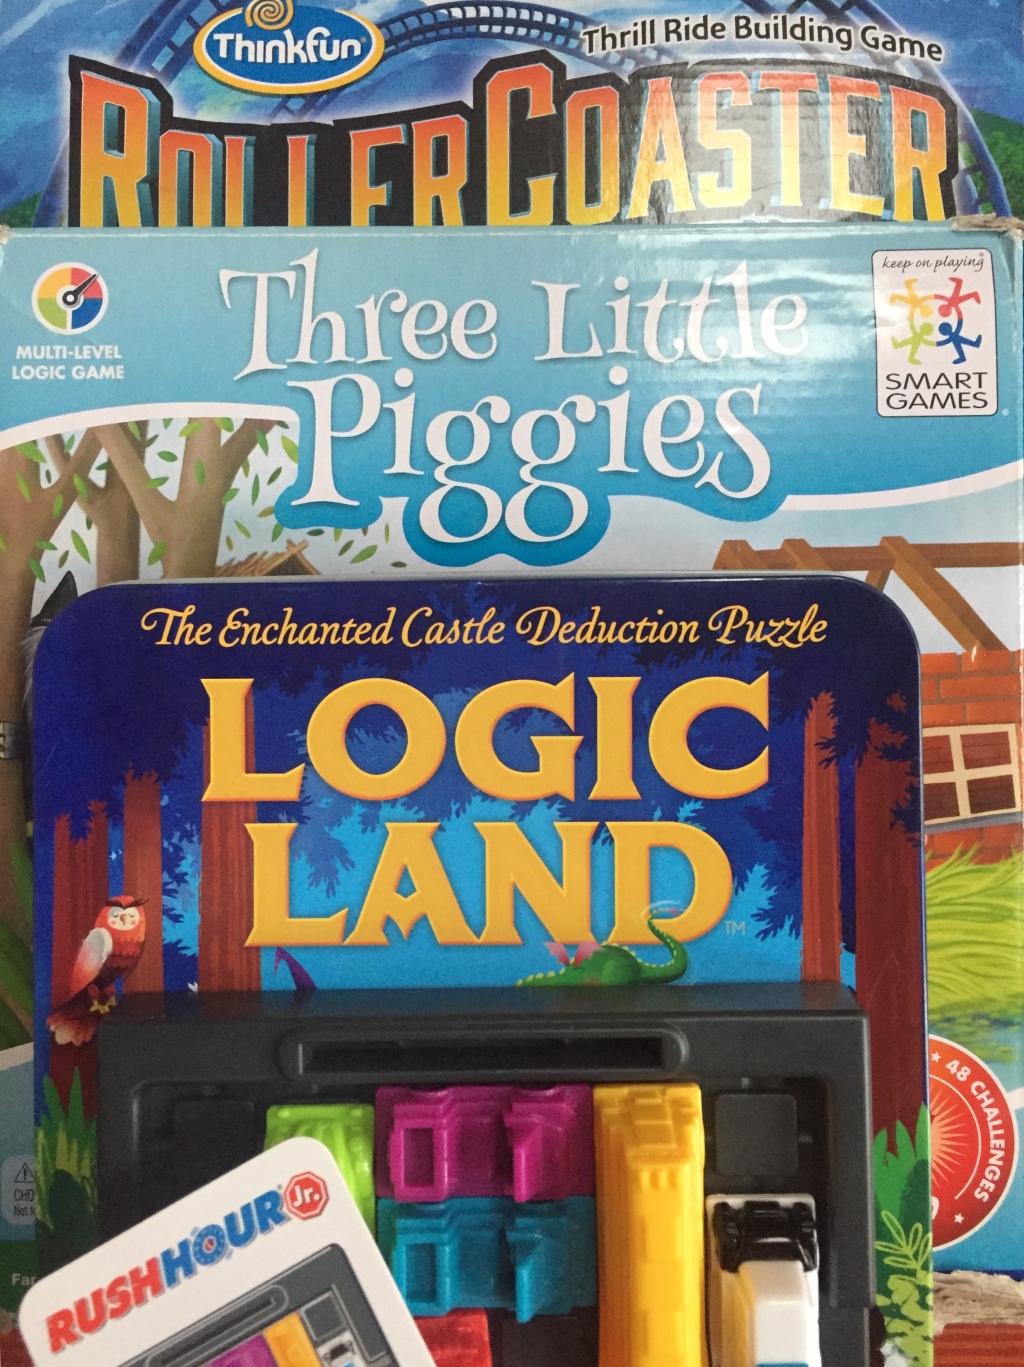 Logic puzzles for kids Roller Coaster Challenge Three Little Piggies Logic Land Castle and Rush Hour Jr in stack